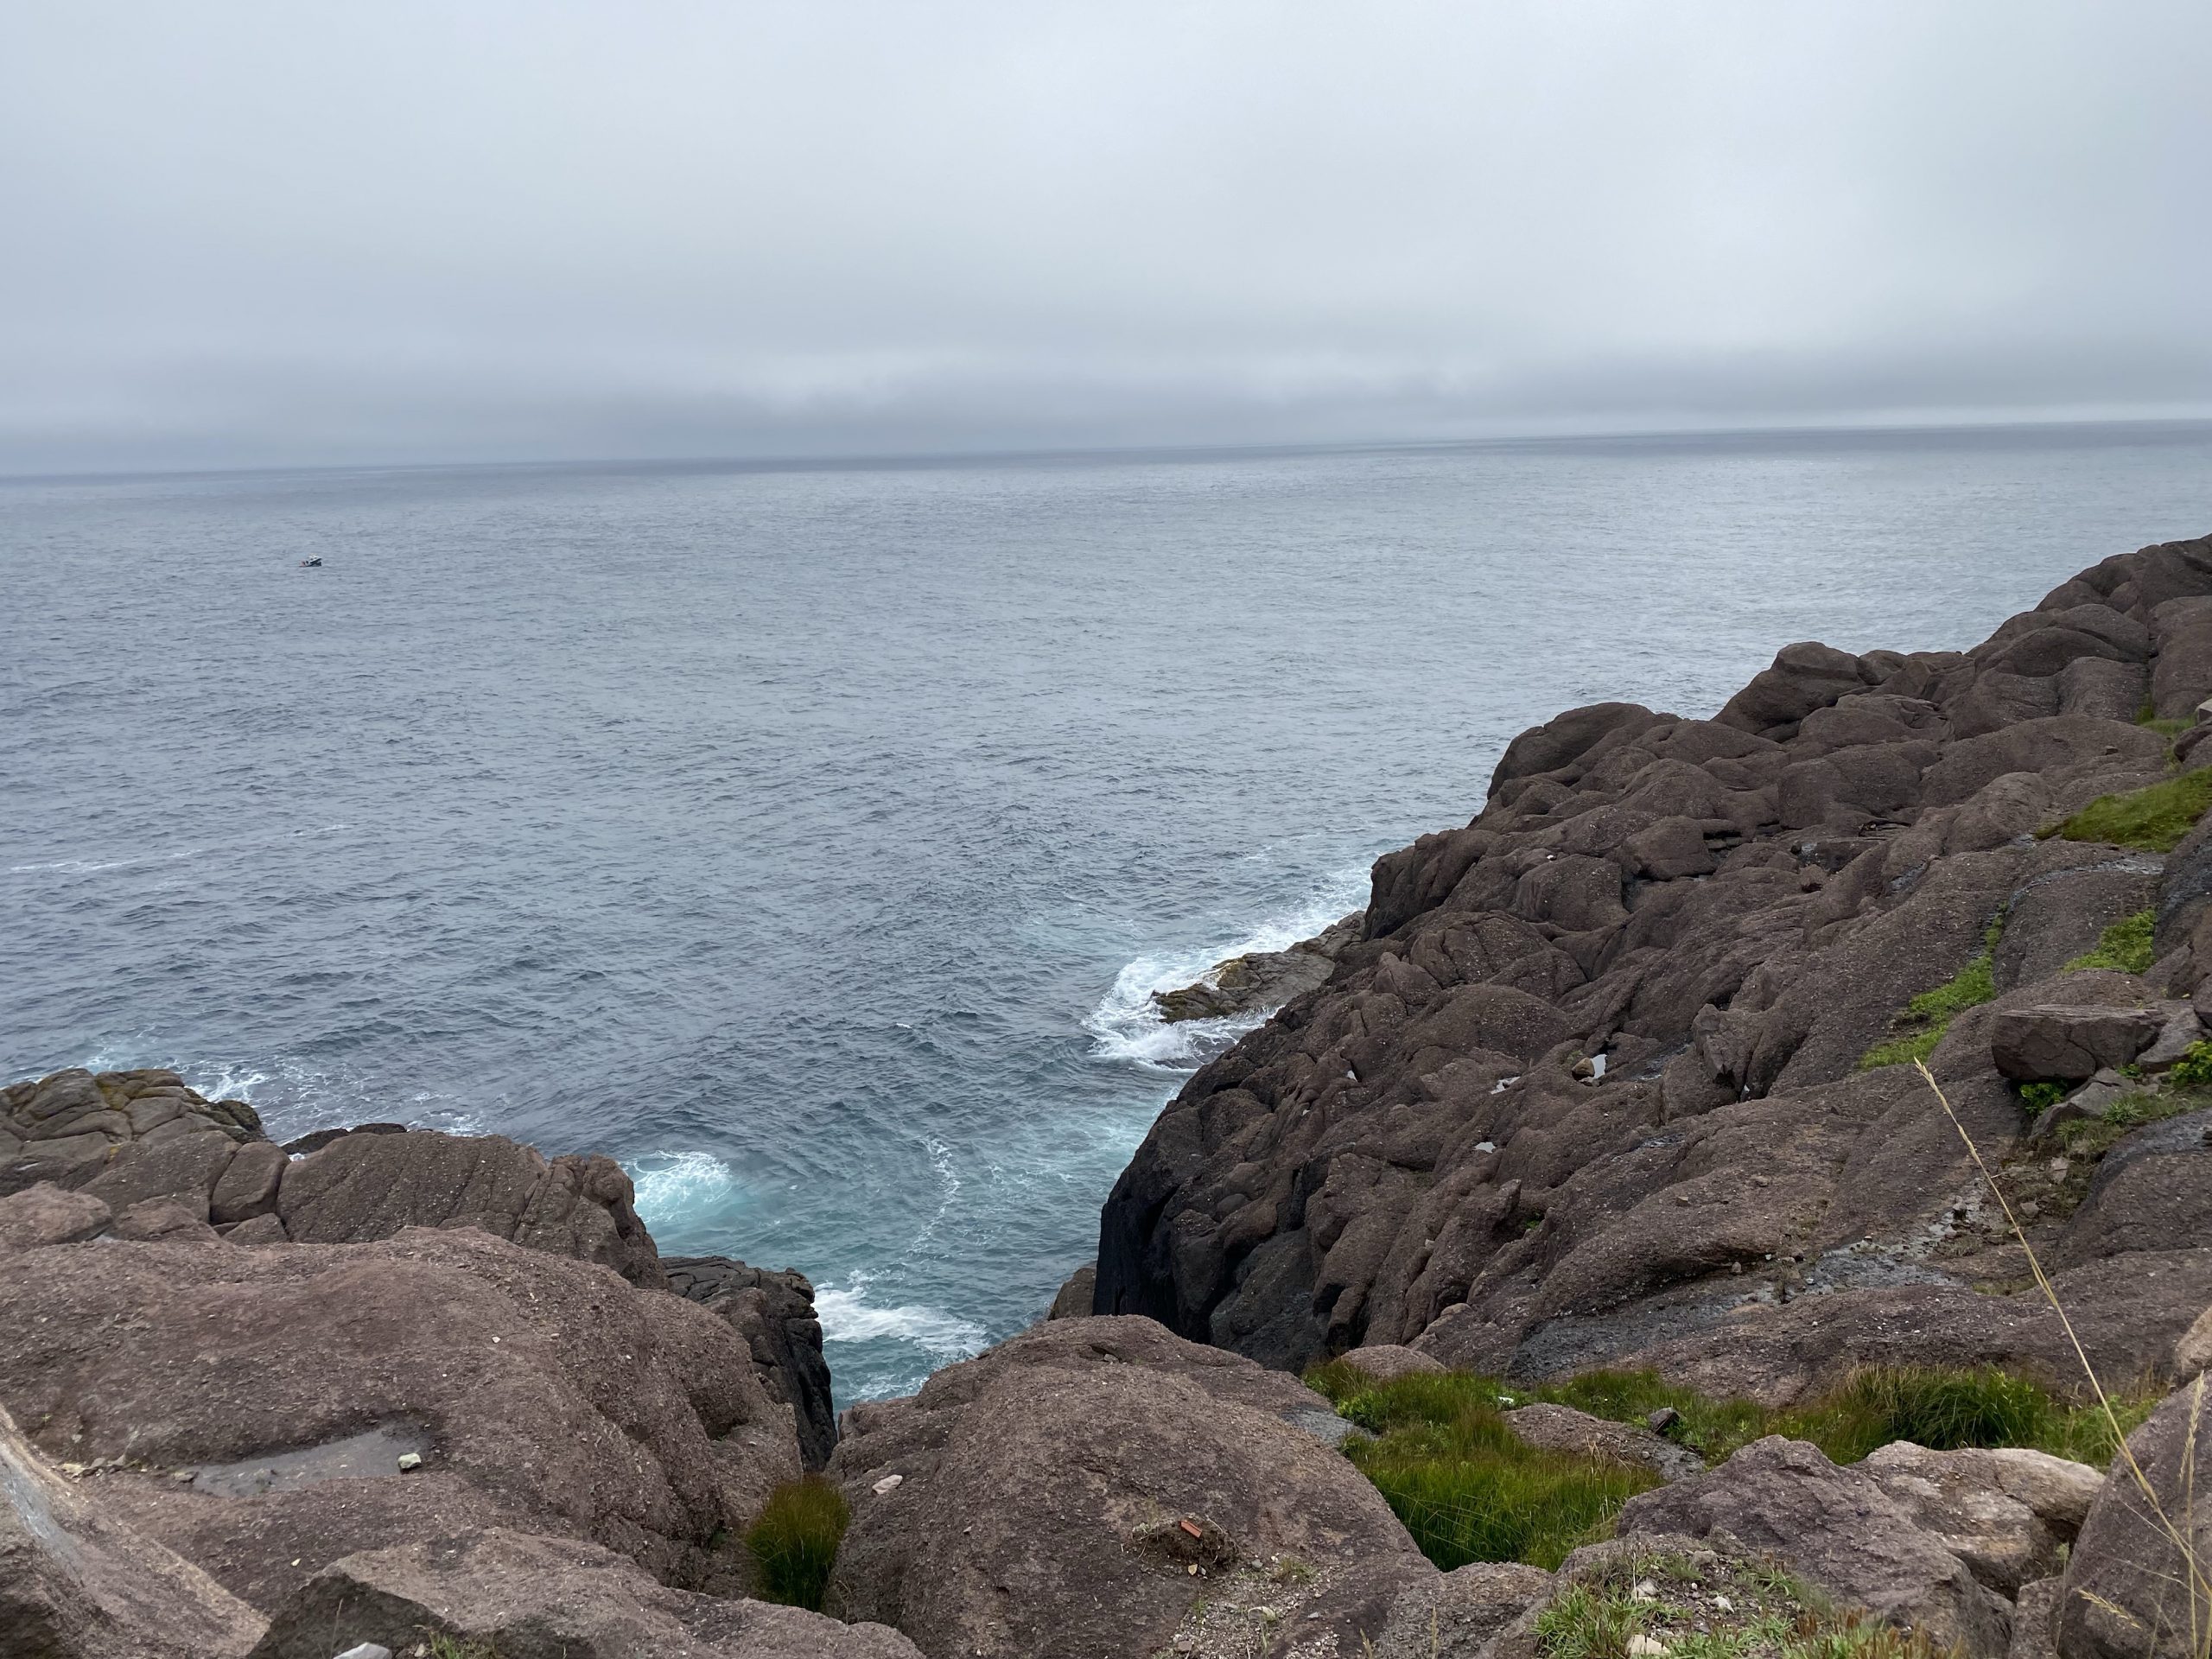 Some of the rocky coastline at Cape Spear.